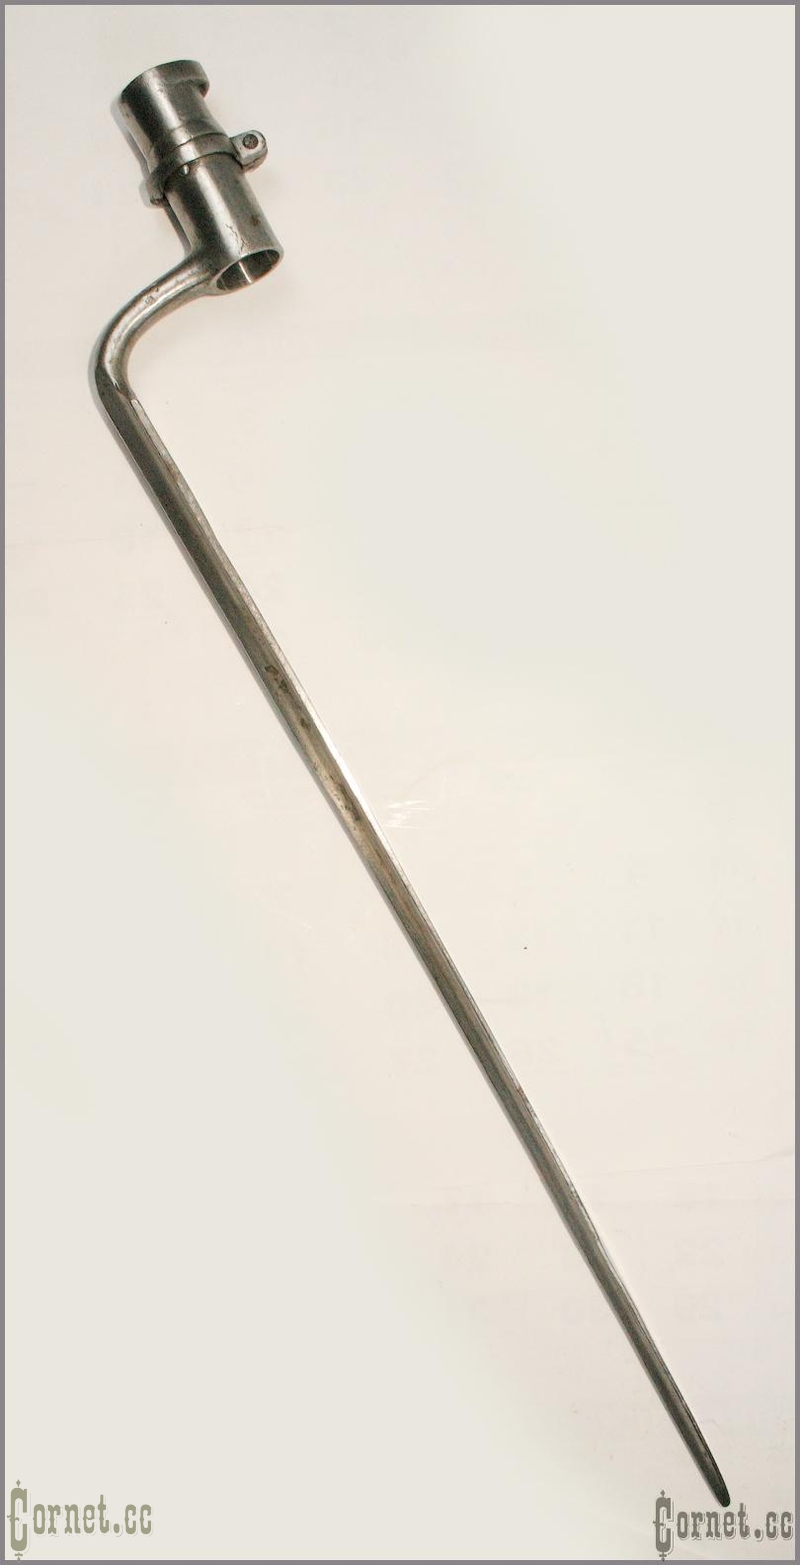 Bayonet to the infantry M 1828 musket